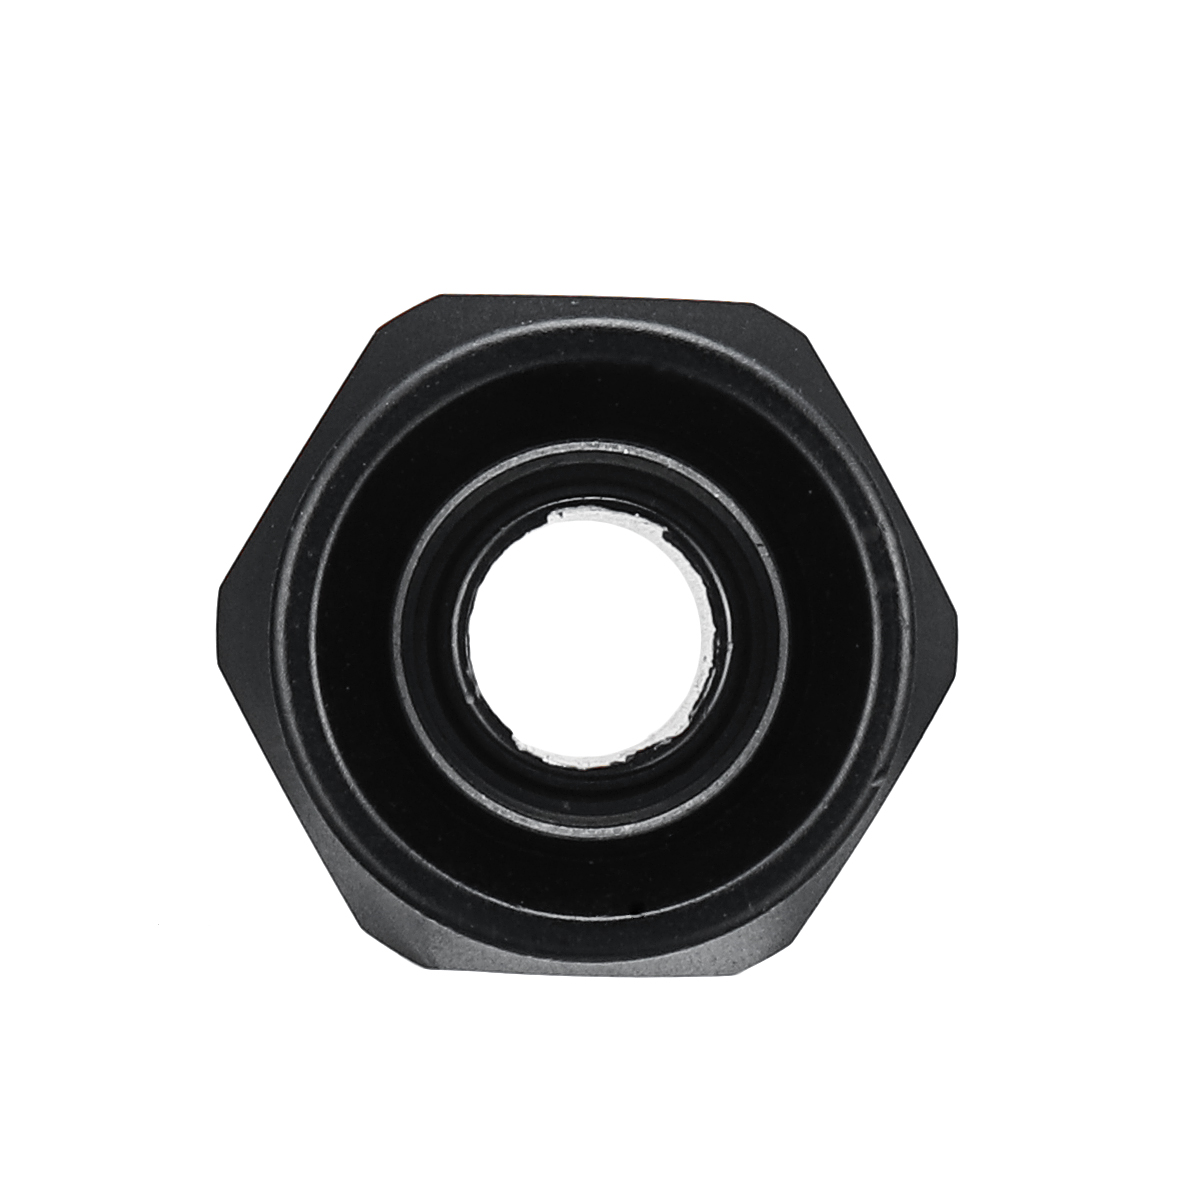 AN-6-Straight-Stealth-Black-Fuel-Hose-Pipes-Fittings-AN6-Connector-1361067-7